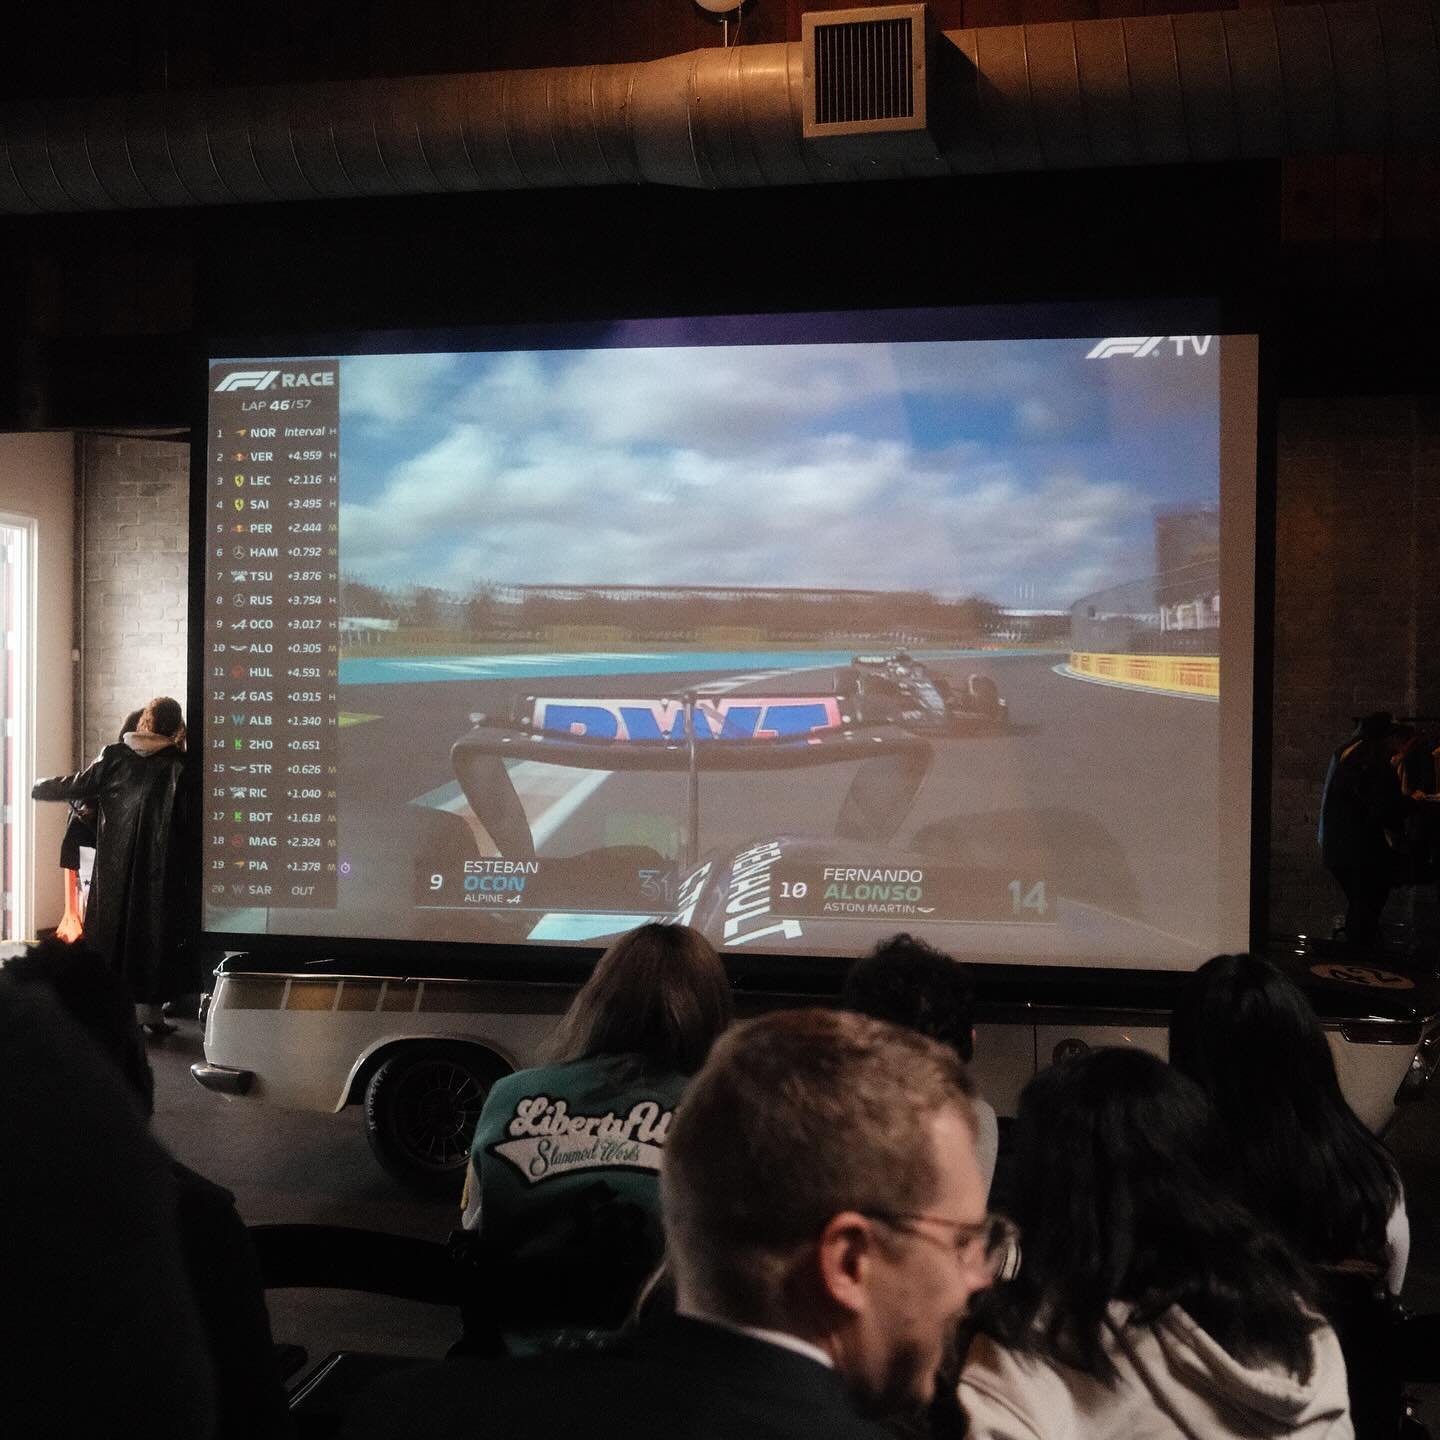 A huge shout out to @fashionxmotorsport by @chlolani and @f1seattle for bringing an amazing @f1 experience to our community! Thank you for inviting us out, we had a great time! It was so fun to watch the race and catch up with so many friends! 

If y